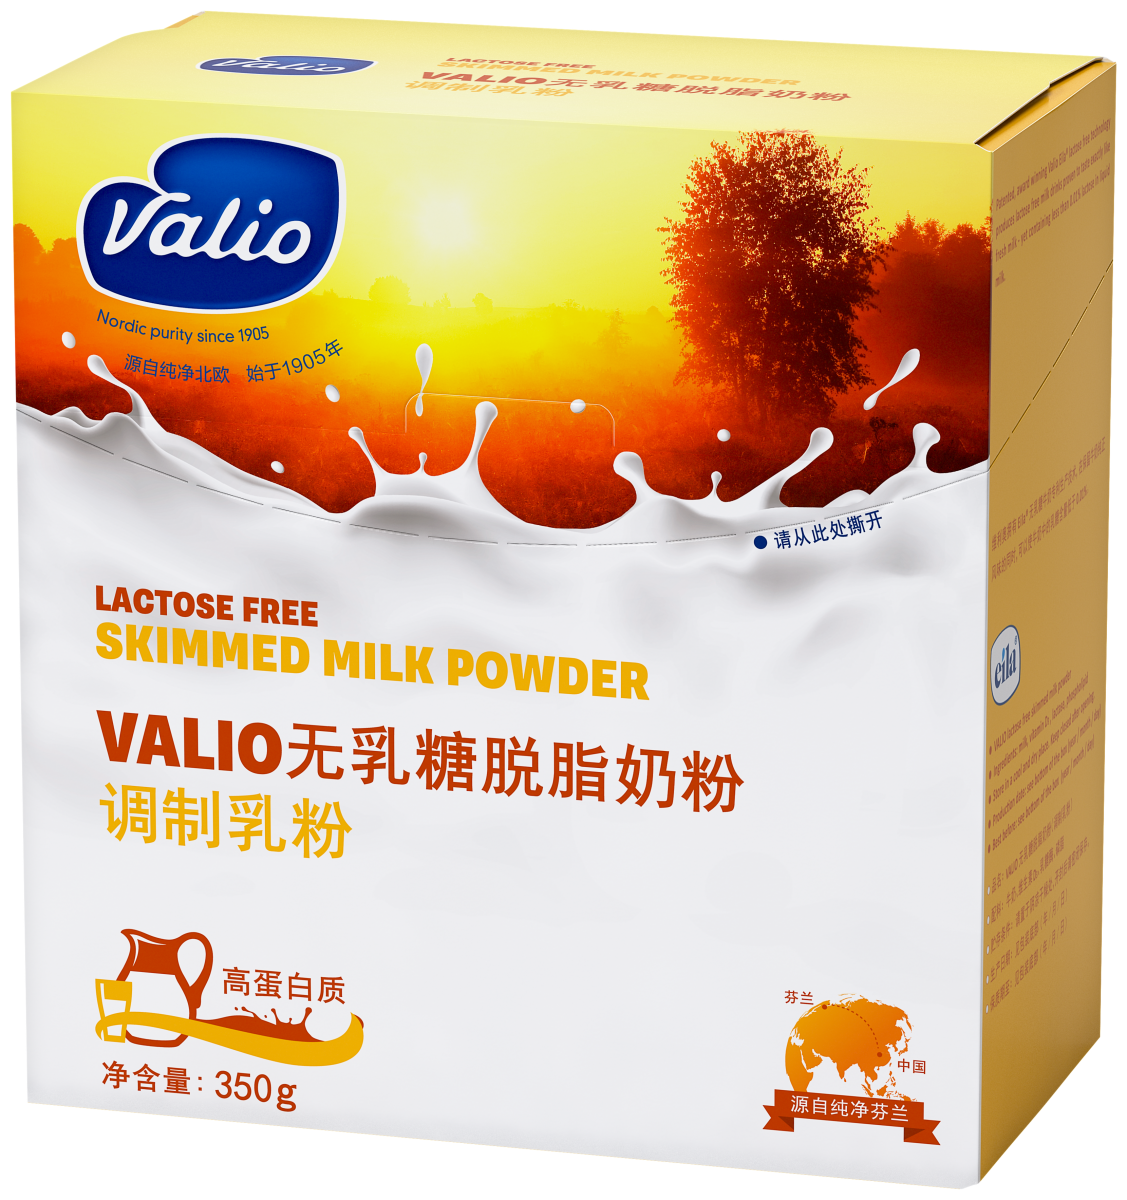 Valio exports lactose-free skimmed milk powders to China